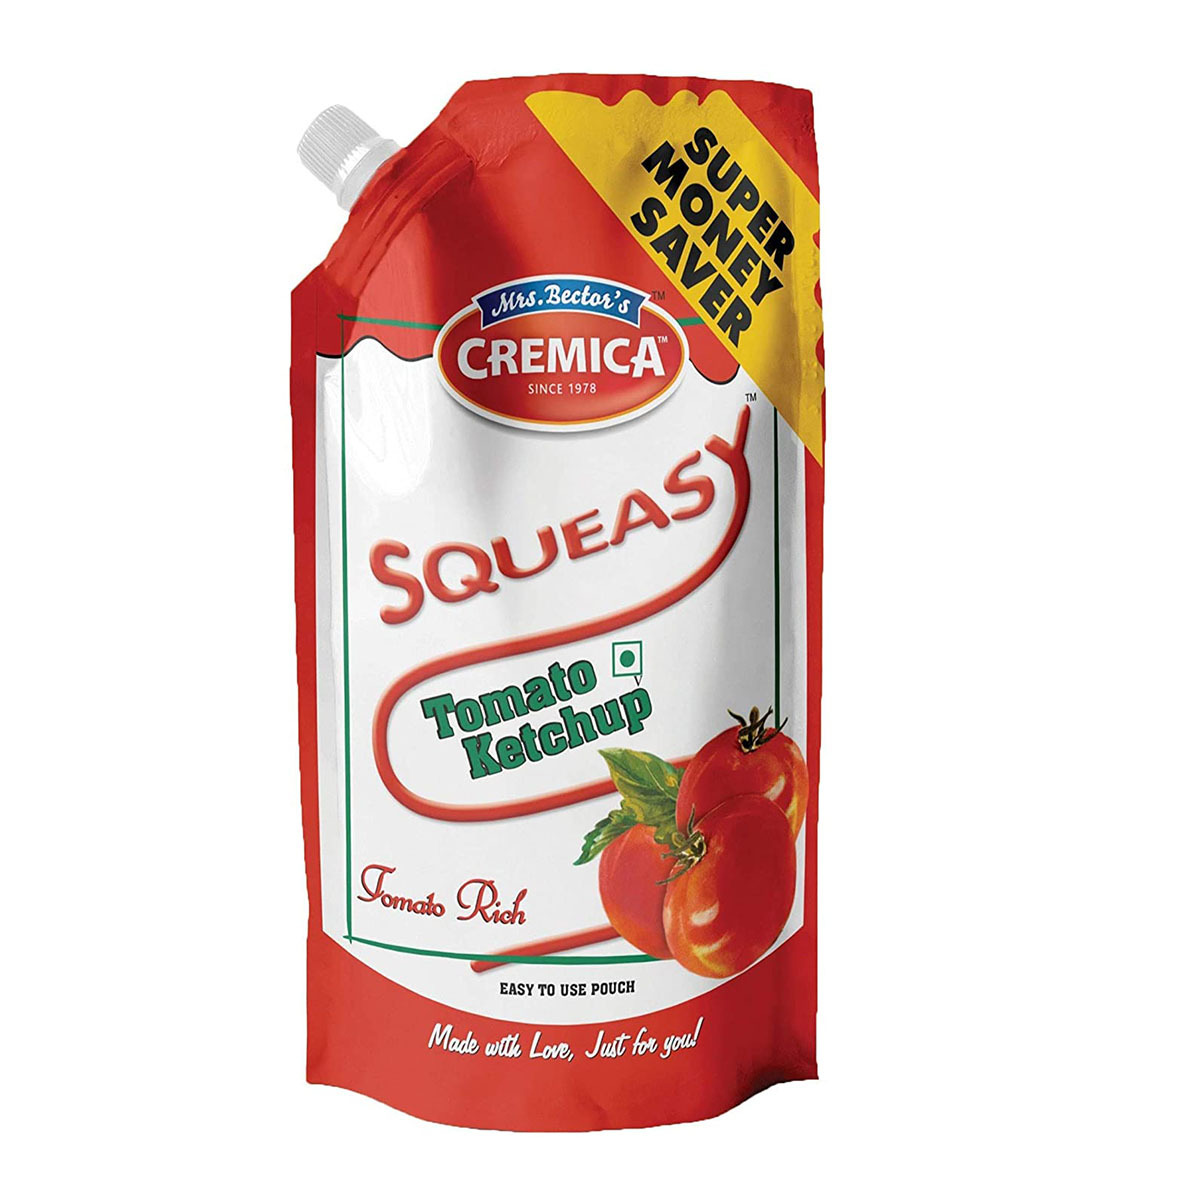 Cremica Tomato Ketchup Squeasy Packet 200g